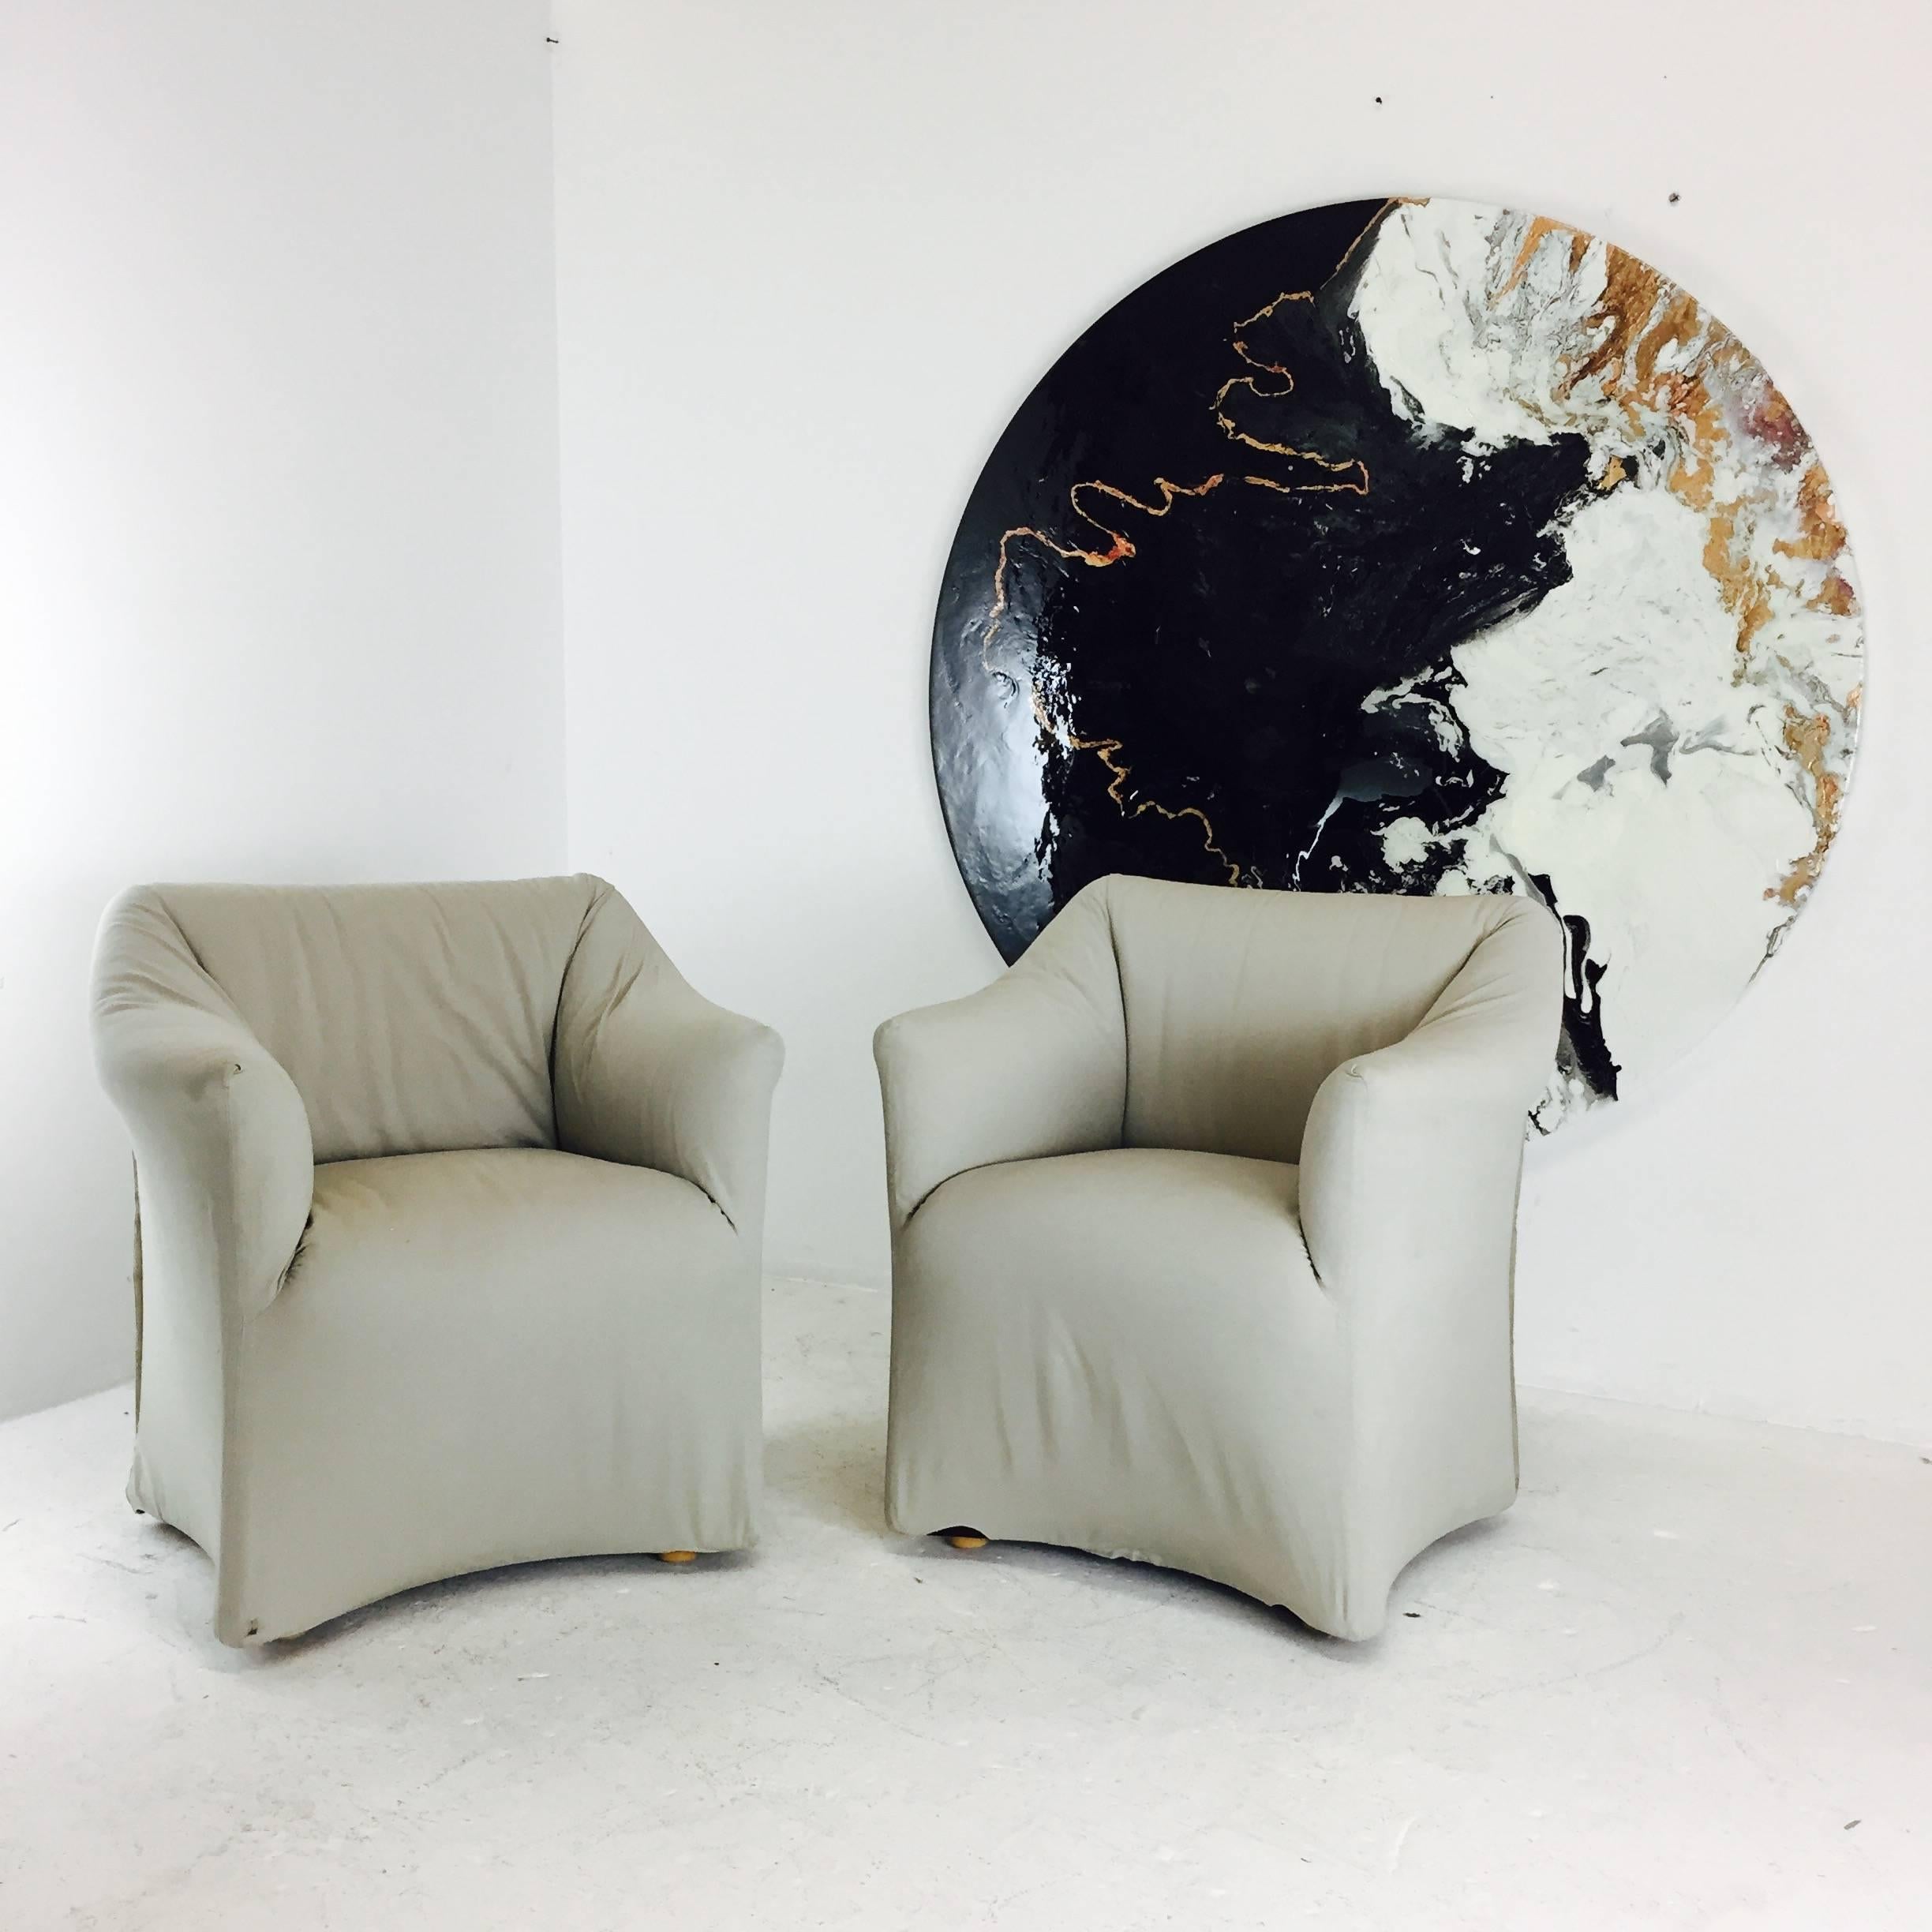 Pair of comfortable Tentazione lounge chairs by Marion Bellini for Cassina. Tailored and sculptural. Upholstery is in good vintage condition, circa 1970s.

Dimensions: 30